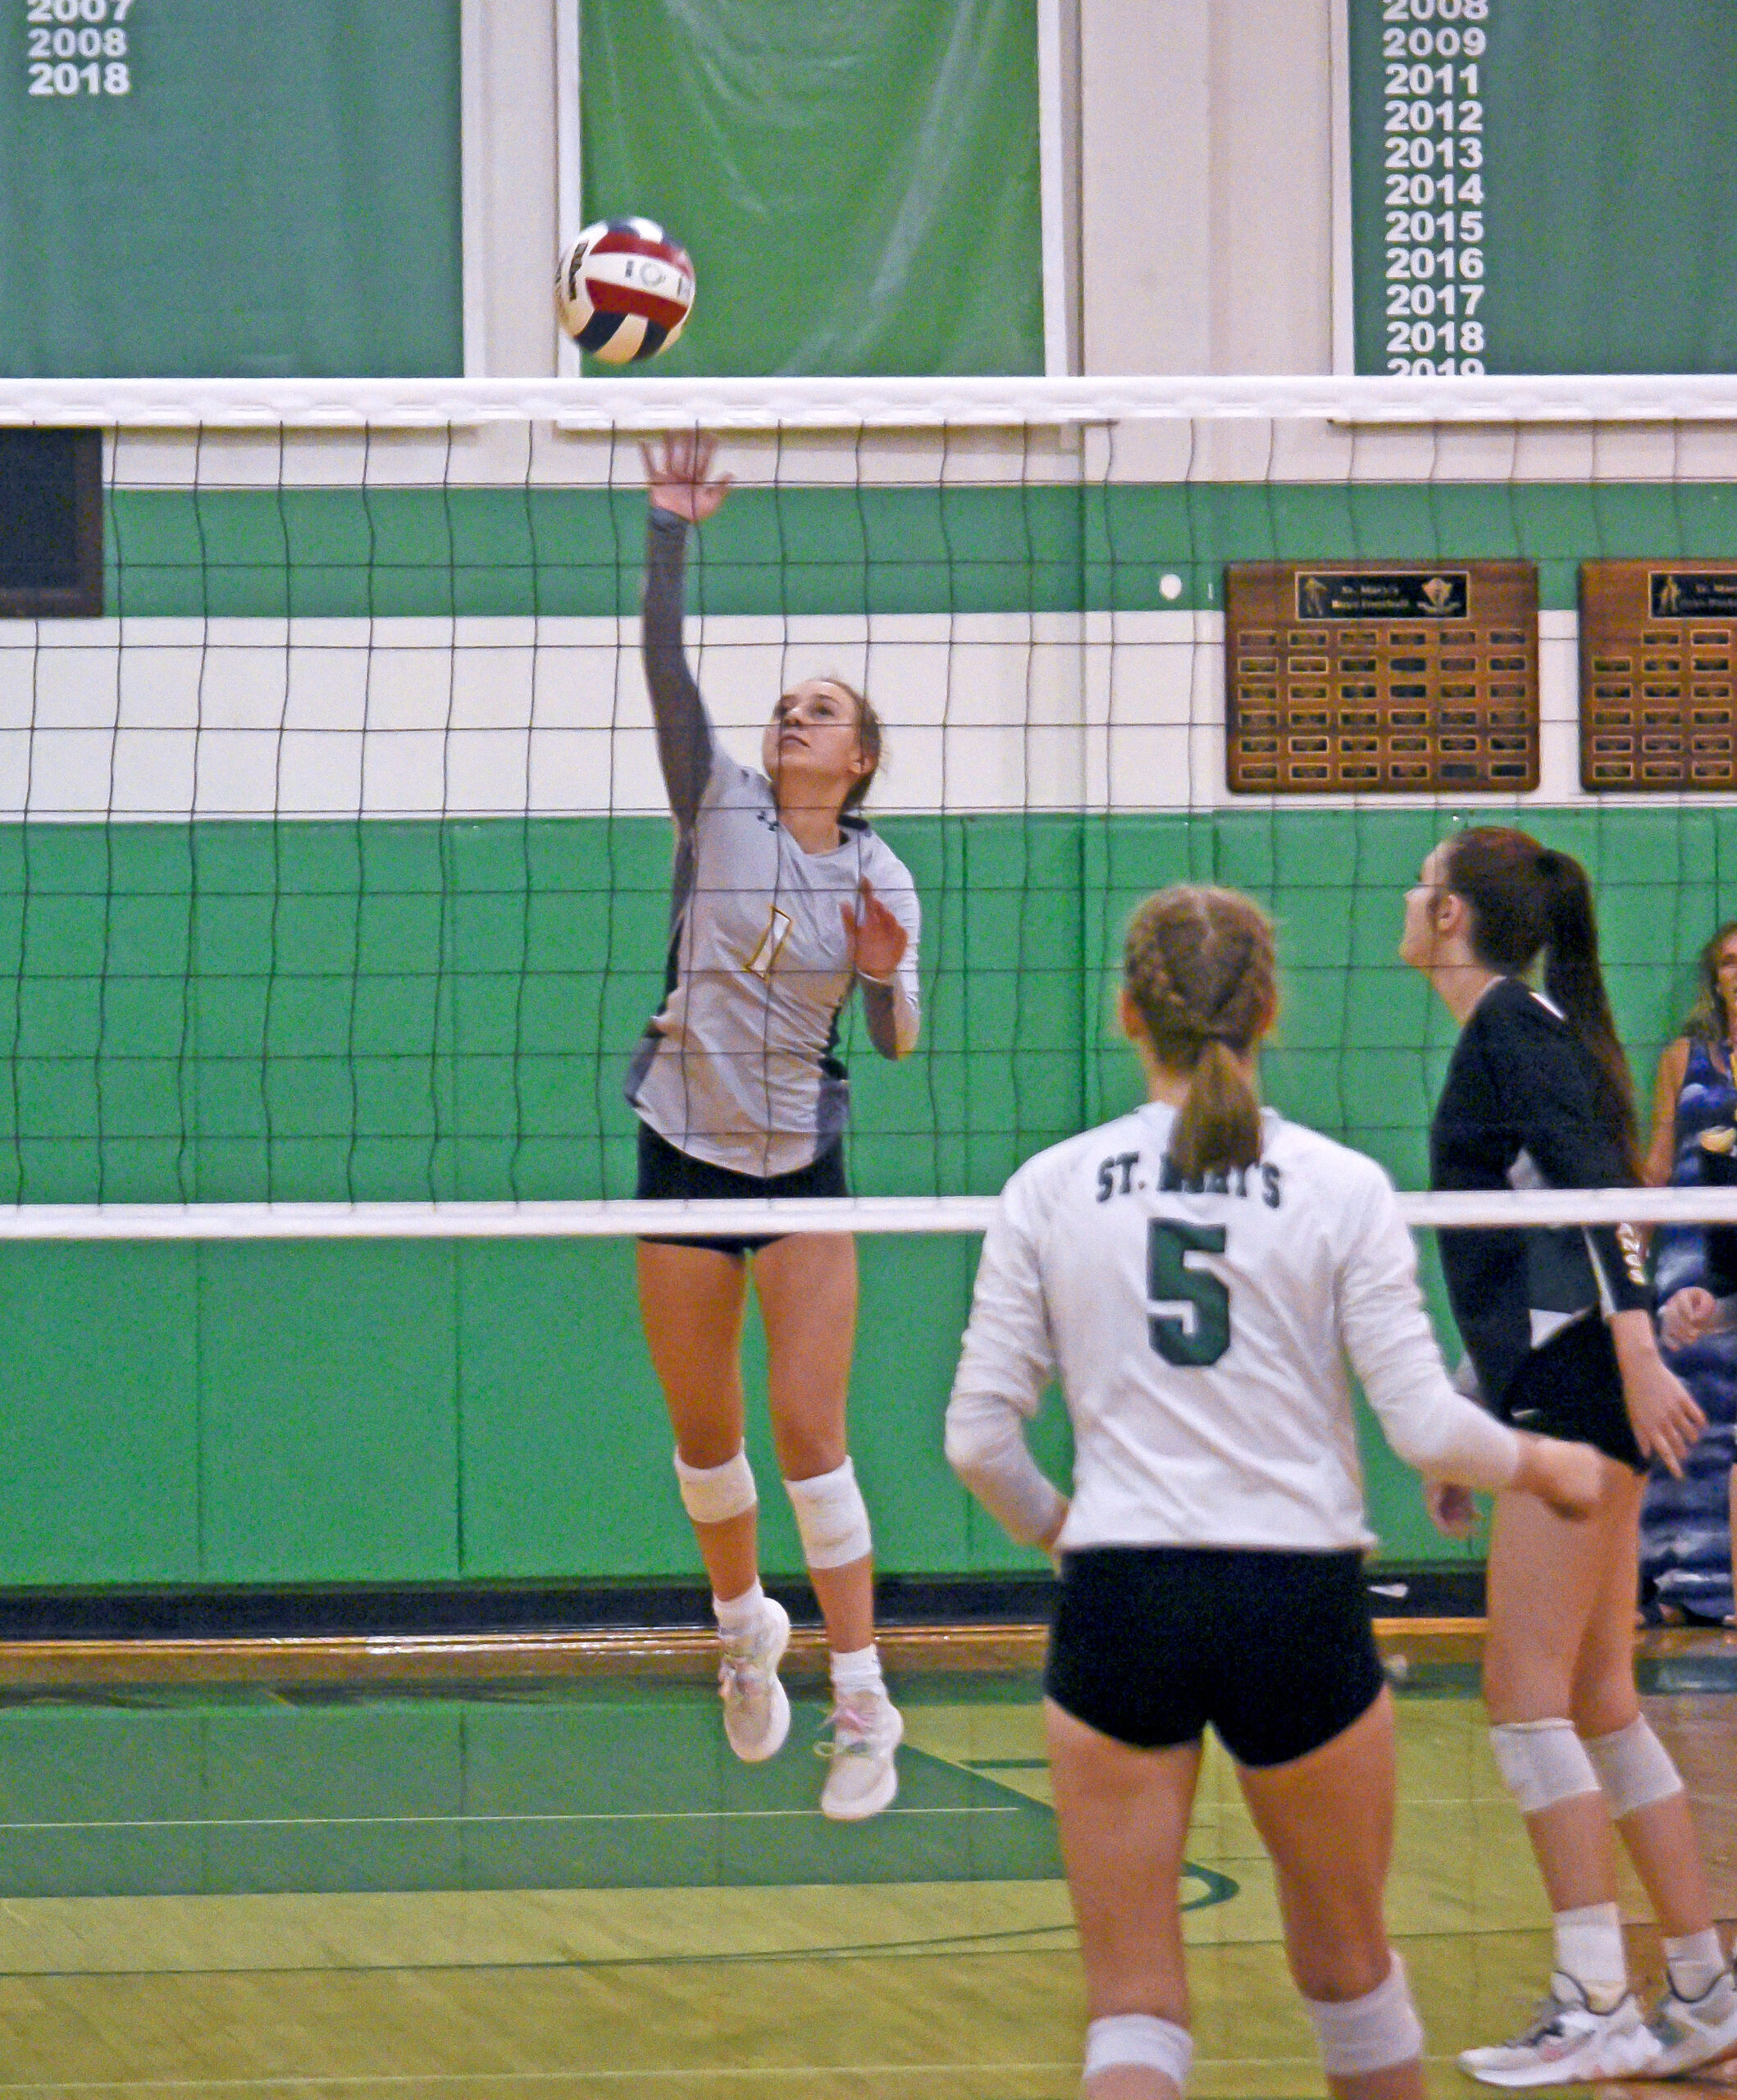 Photo by Bryan Oller. Norah Jorstad defends the net during the Mustangs’ Sept. 13 match against St. Mary’s.